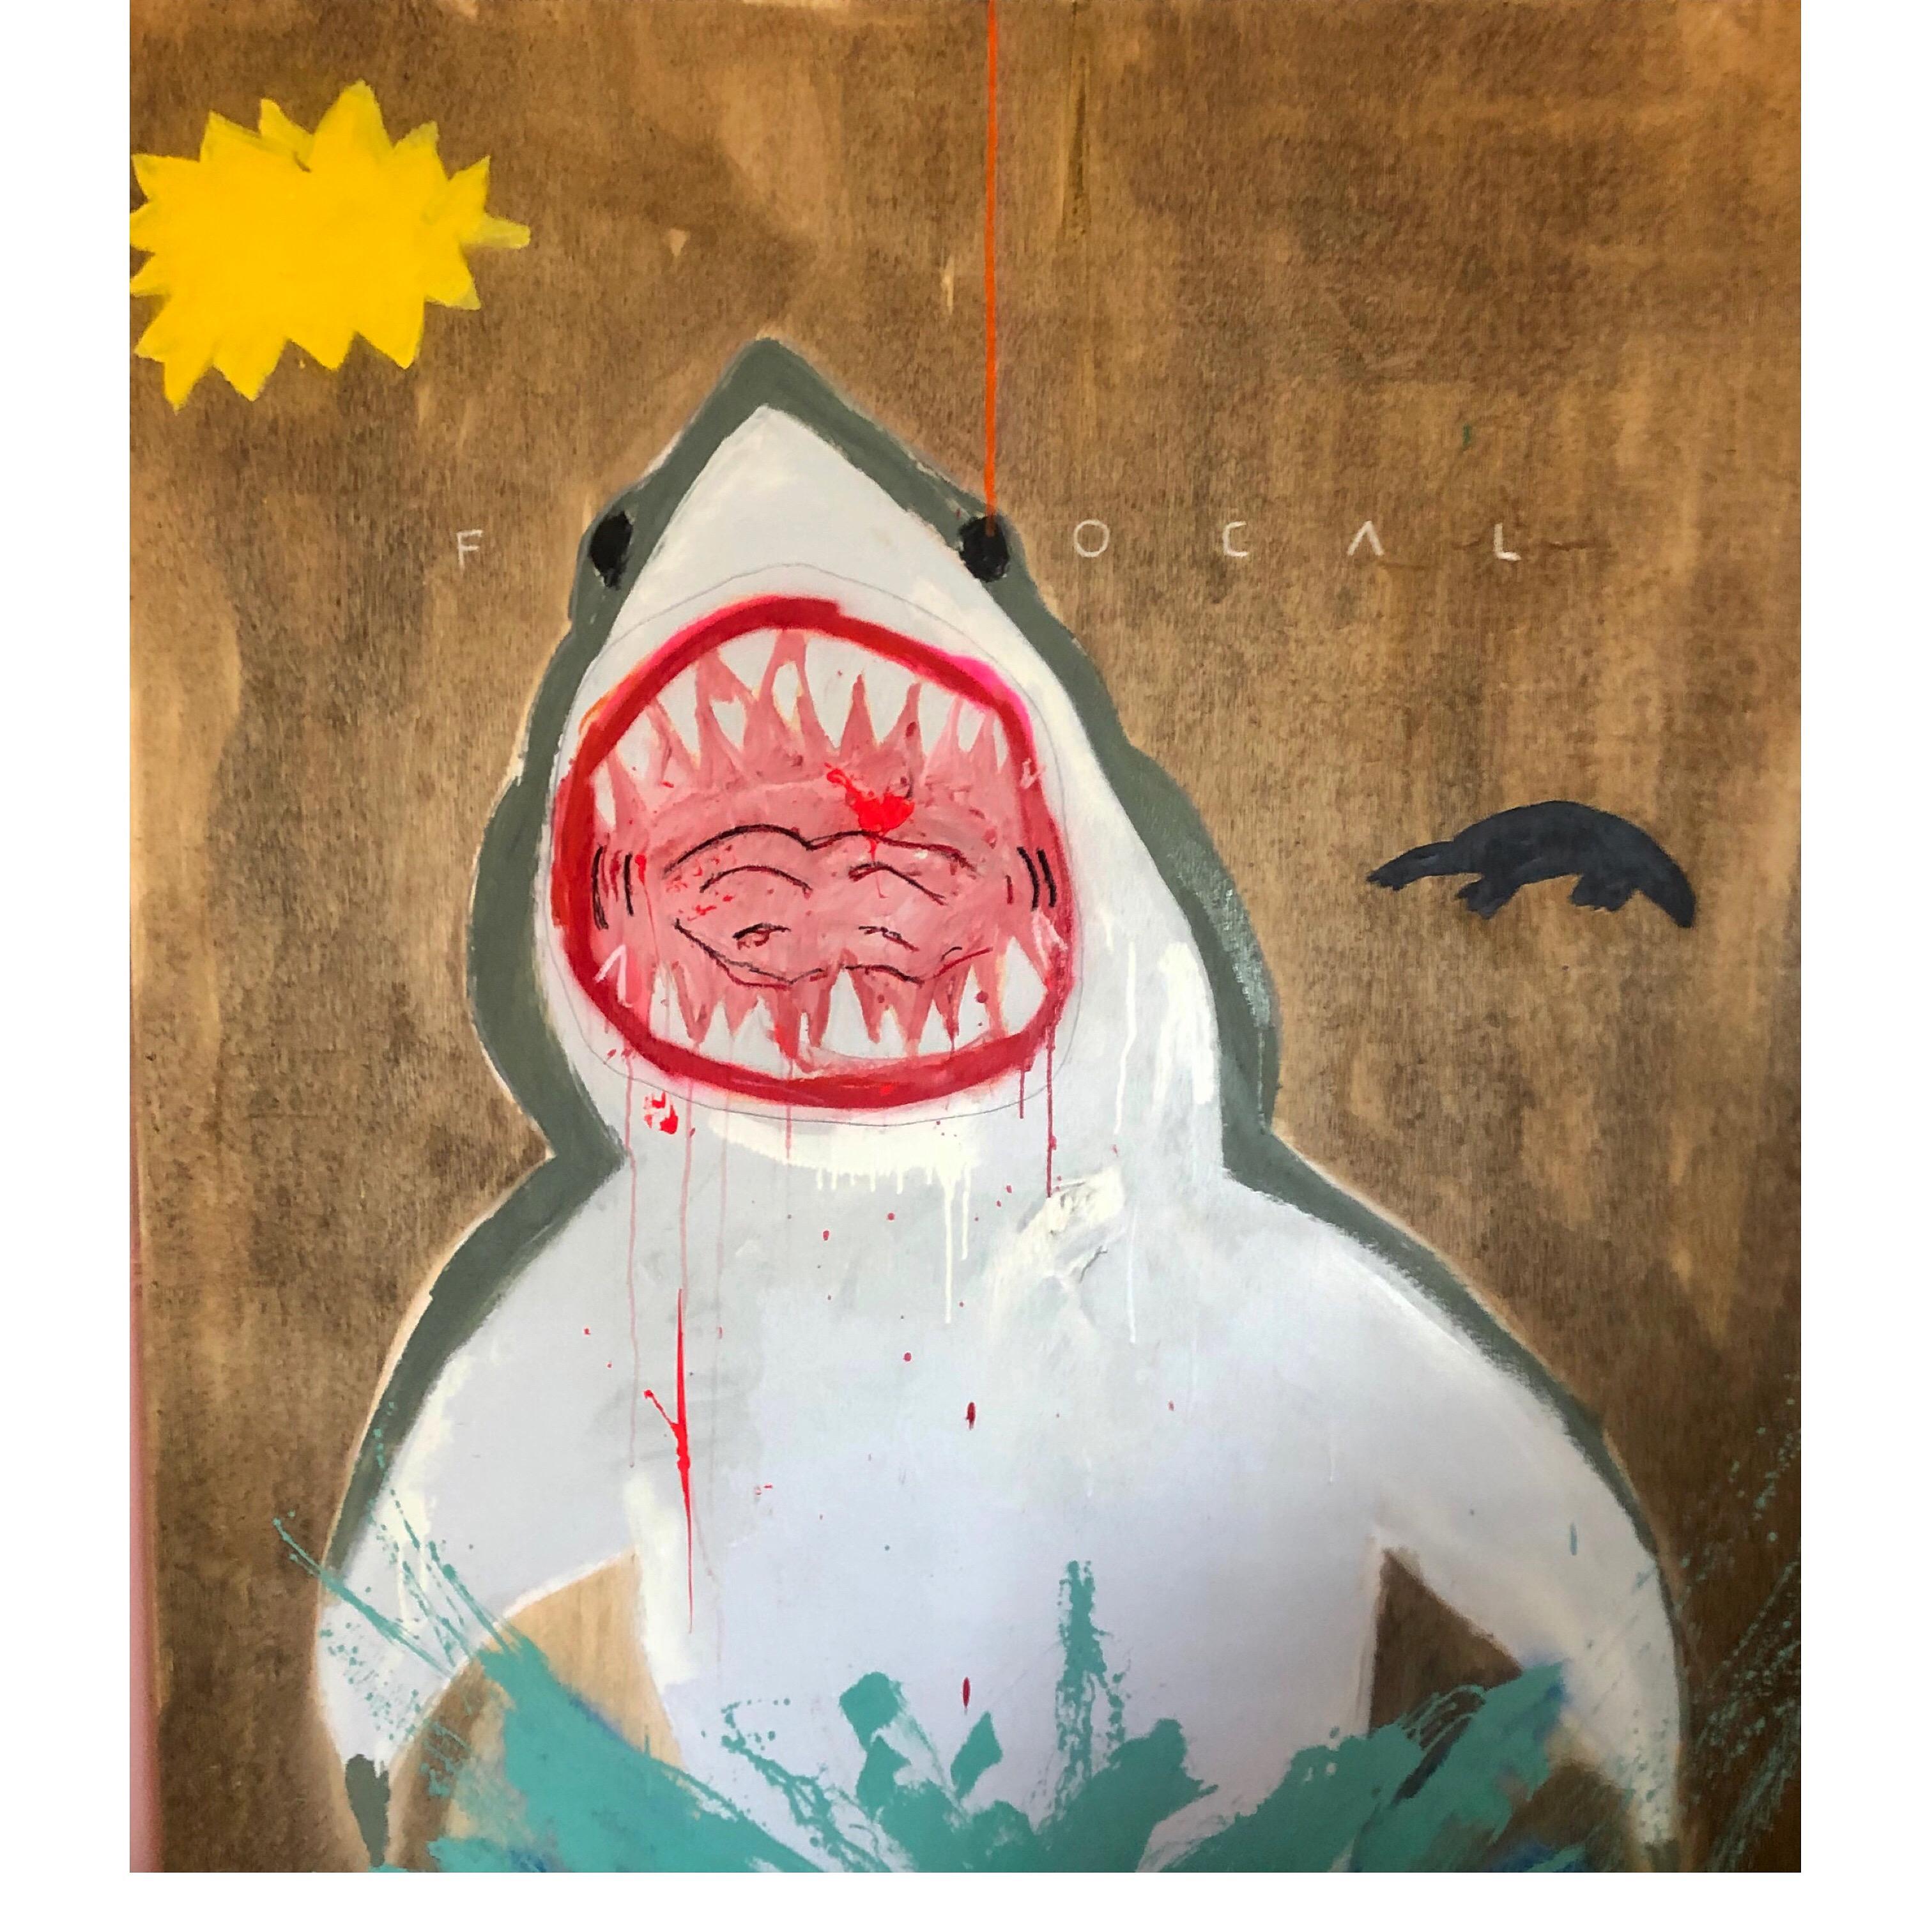 Breaching For The Stars, 2020, Mixed Media on Wood - Mixed Media Art by Justin Lyons